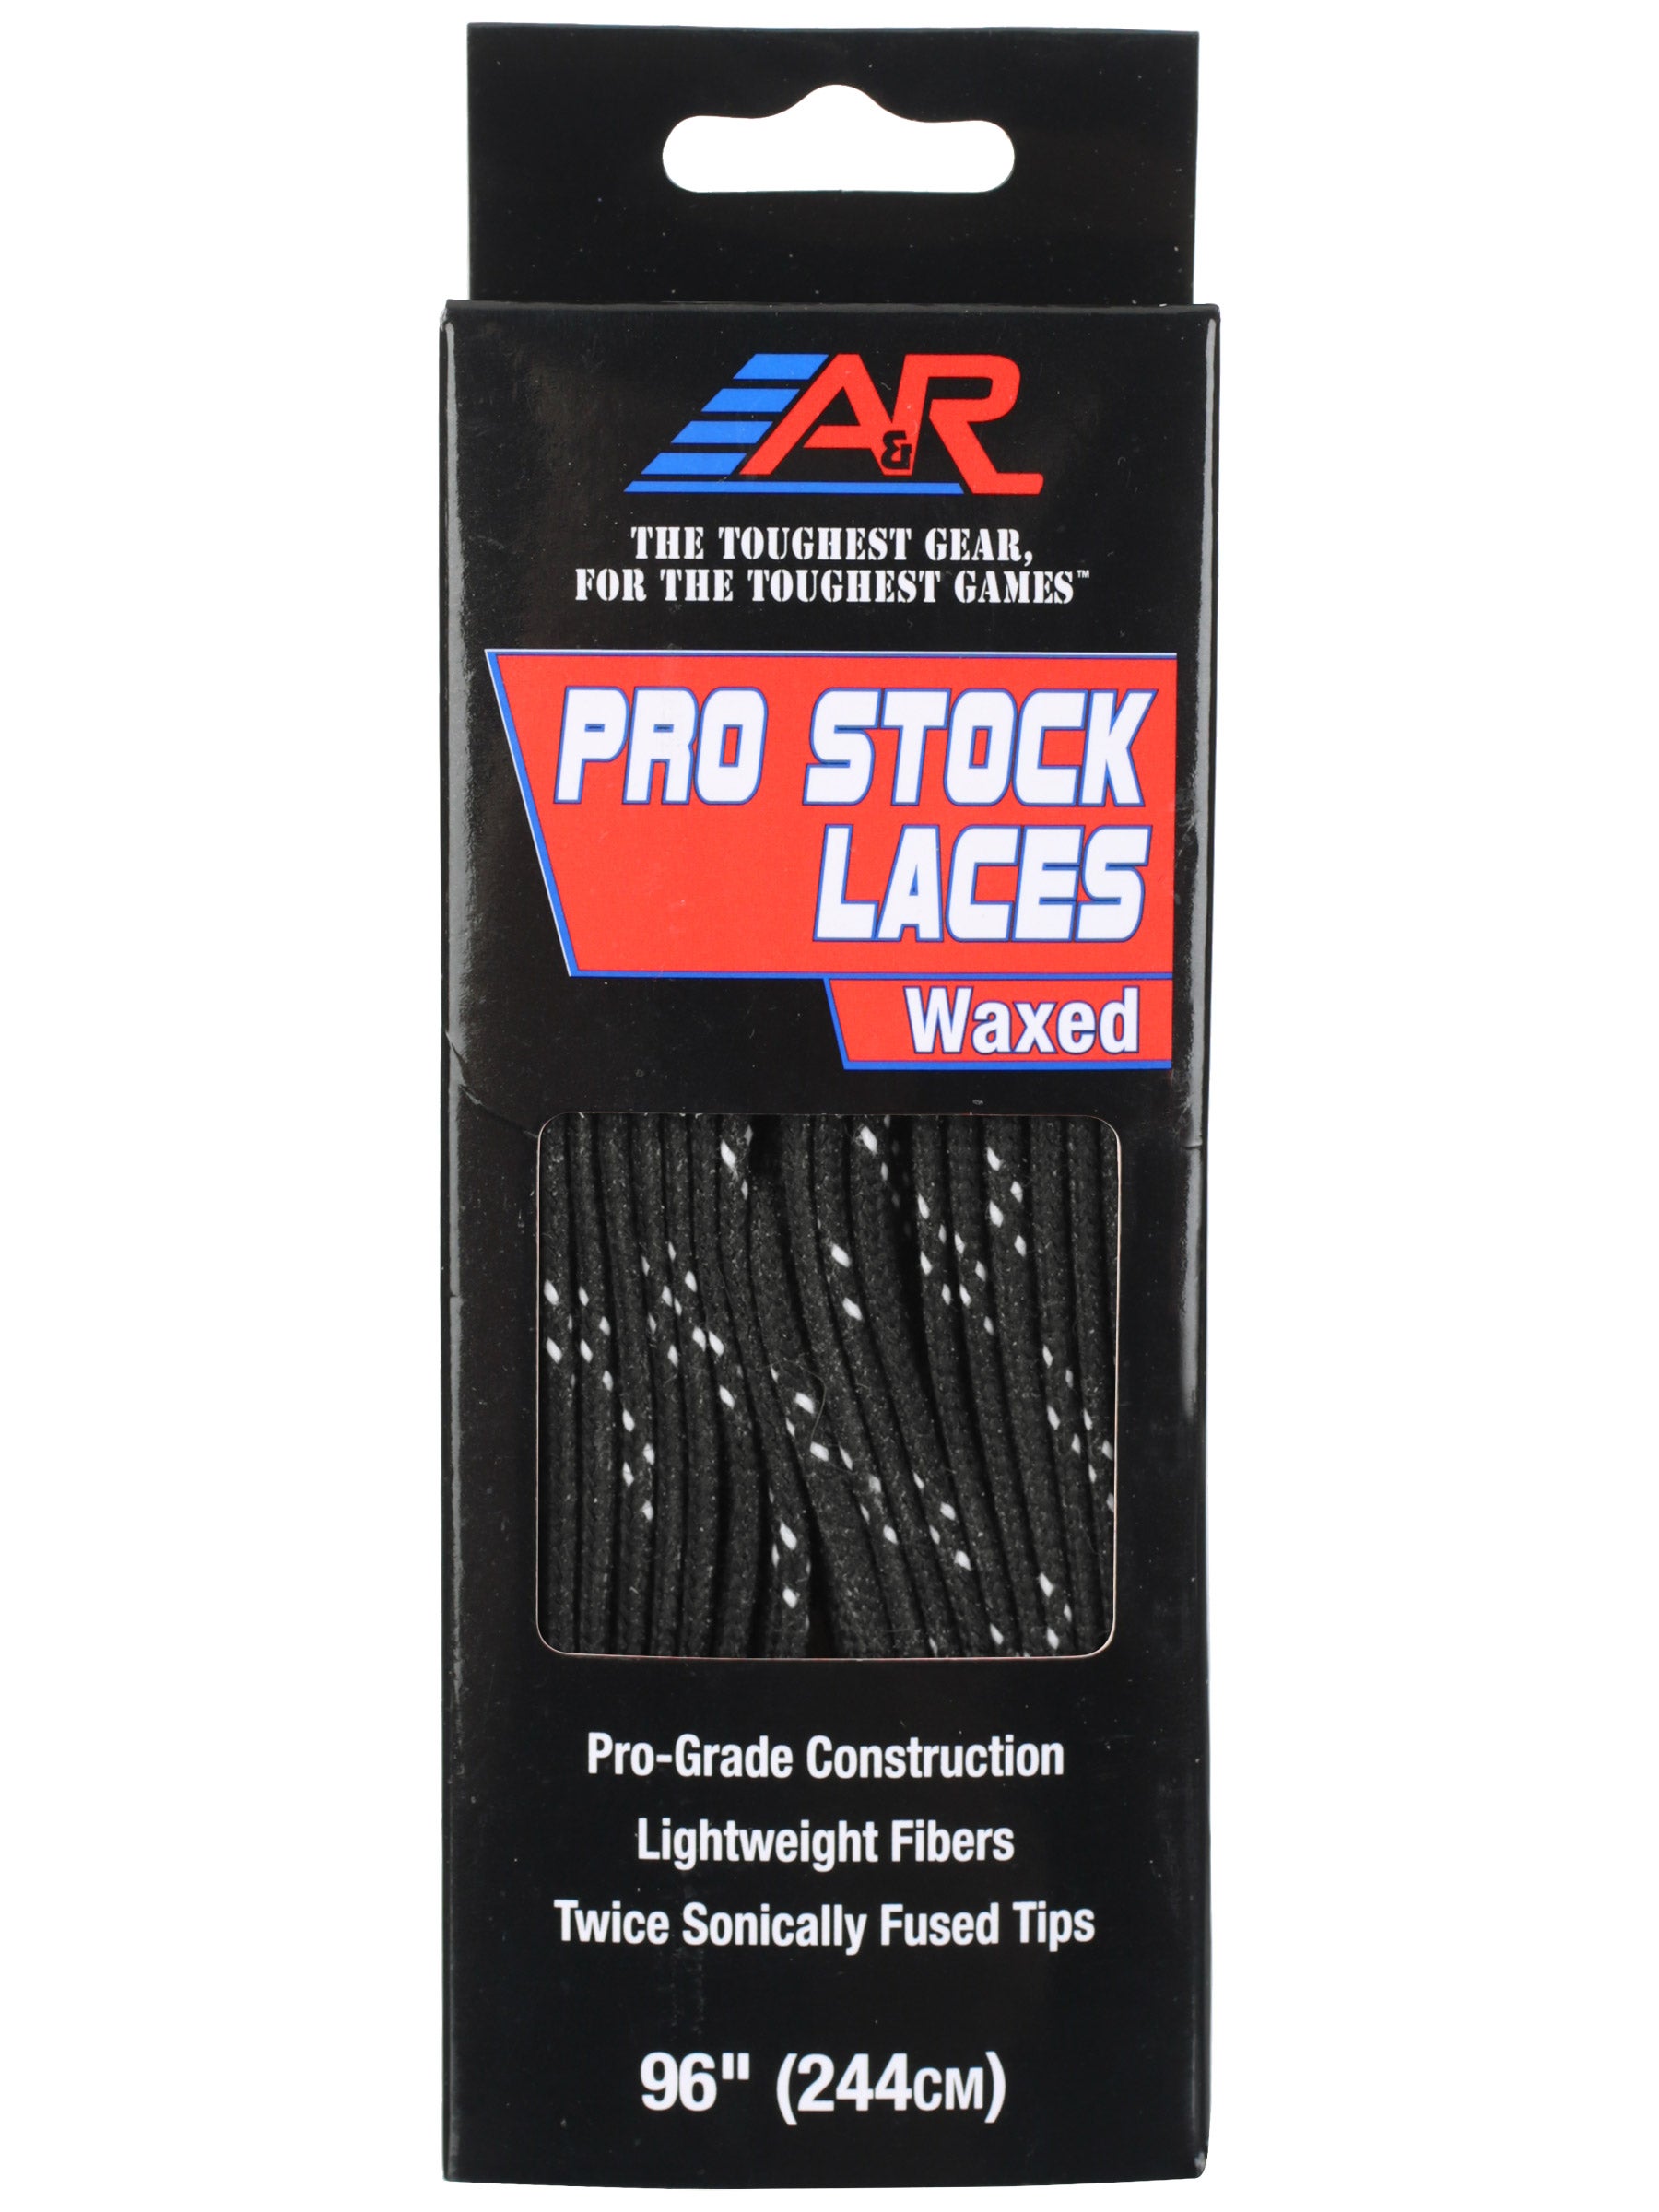 A&R Sports Hockey Ice Skates Pro Stock Non-Waxed Laces Wh/ Blk 108 Inches 